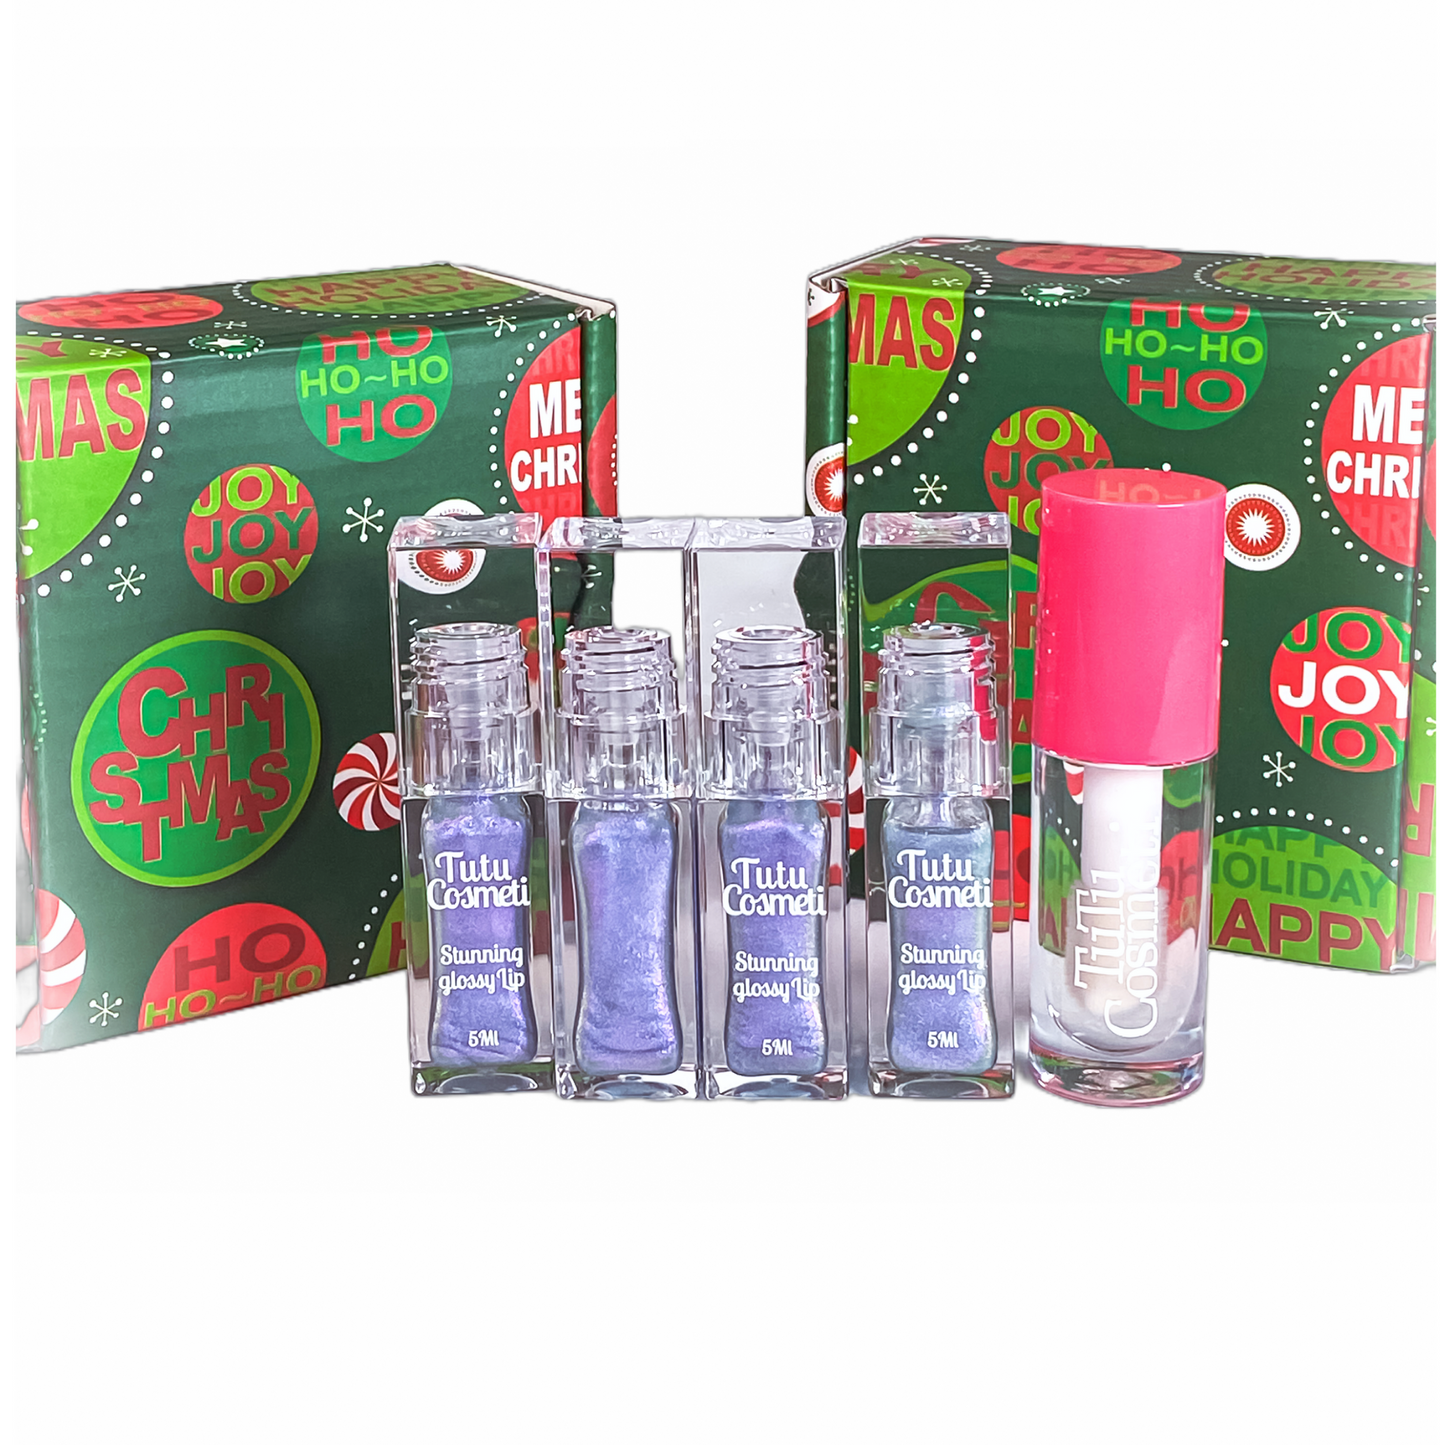 Christmas gift ideas bundle,  color-changing lip oil bundle with a free crystal clear lip gloss, and a free pair of earning 